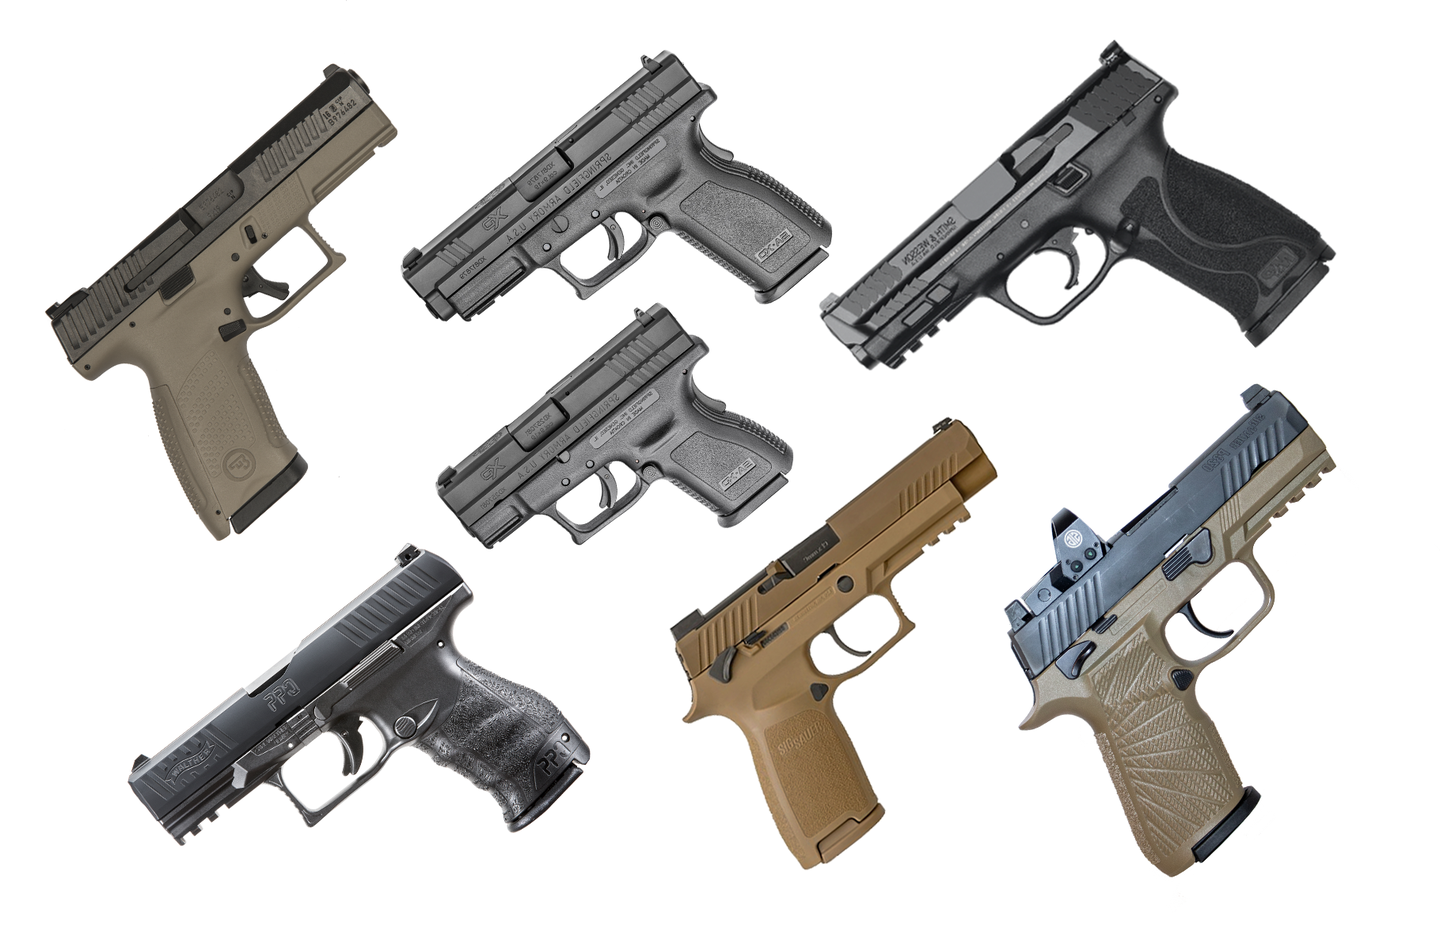 Whats another word for Glock?